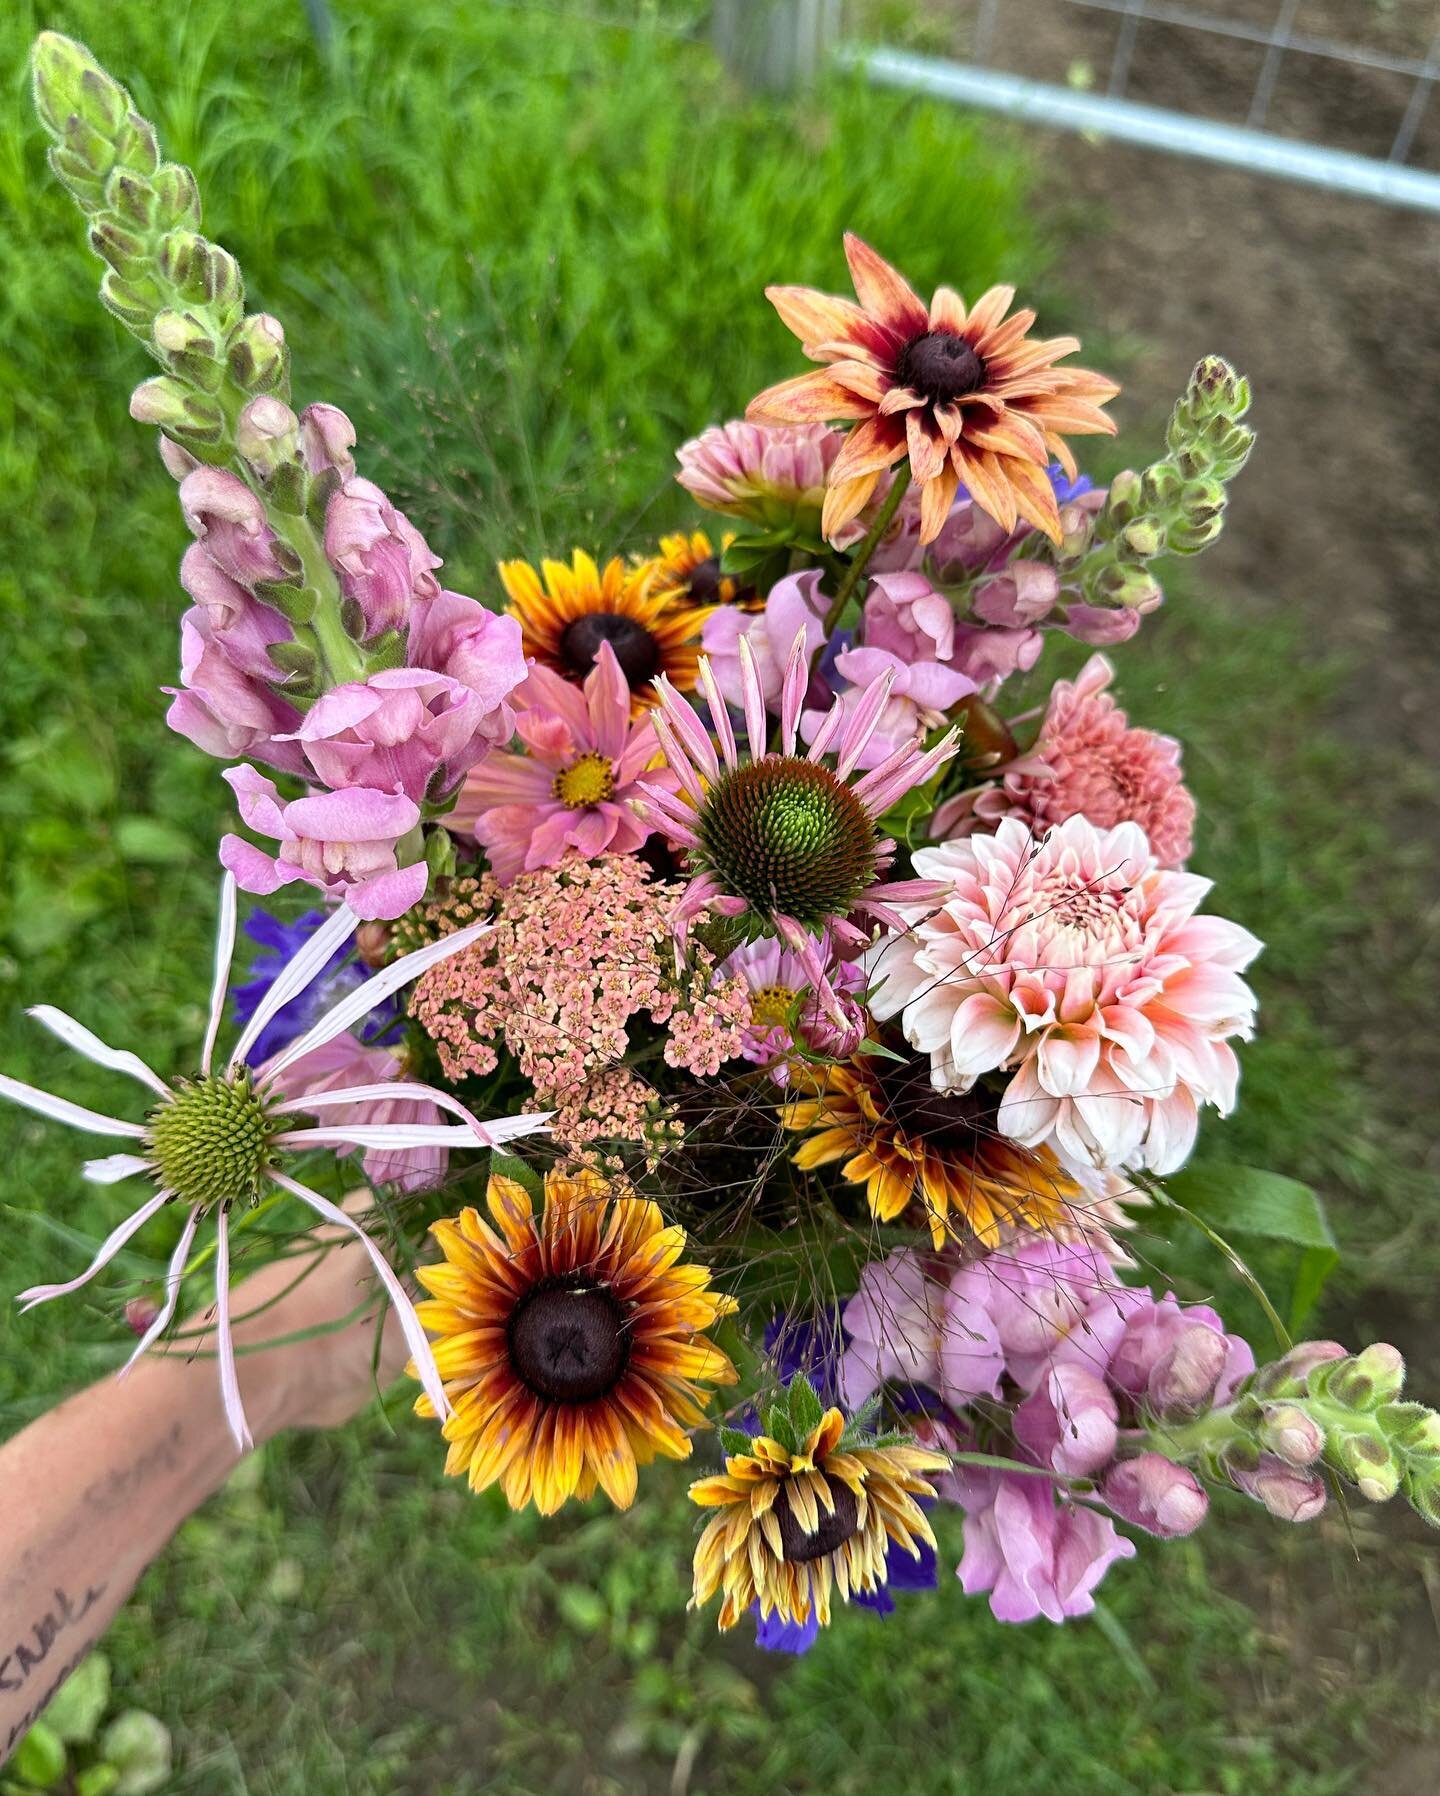 Too pretty&hellip; flowers for me 🥰 and flowers for the market - this is the first week DAHLIAS are making an appearance in our Big Bouquets - 2 sizes of mixed bouquets this week. @litchfieldhillsfarmfreshmarket litchfieldhillsfarmfreshmarket from 1